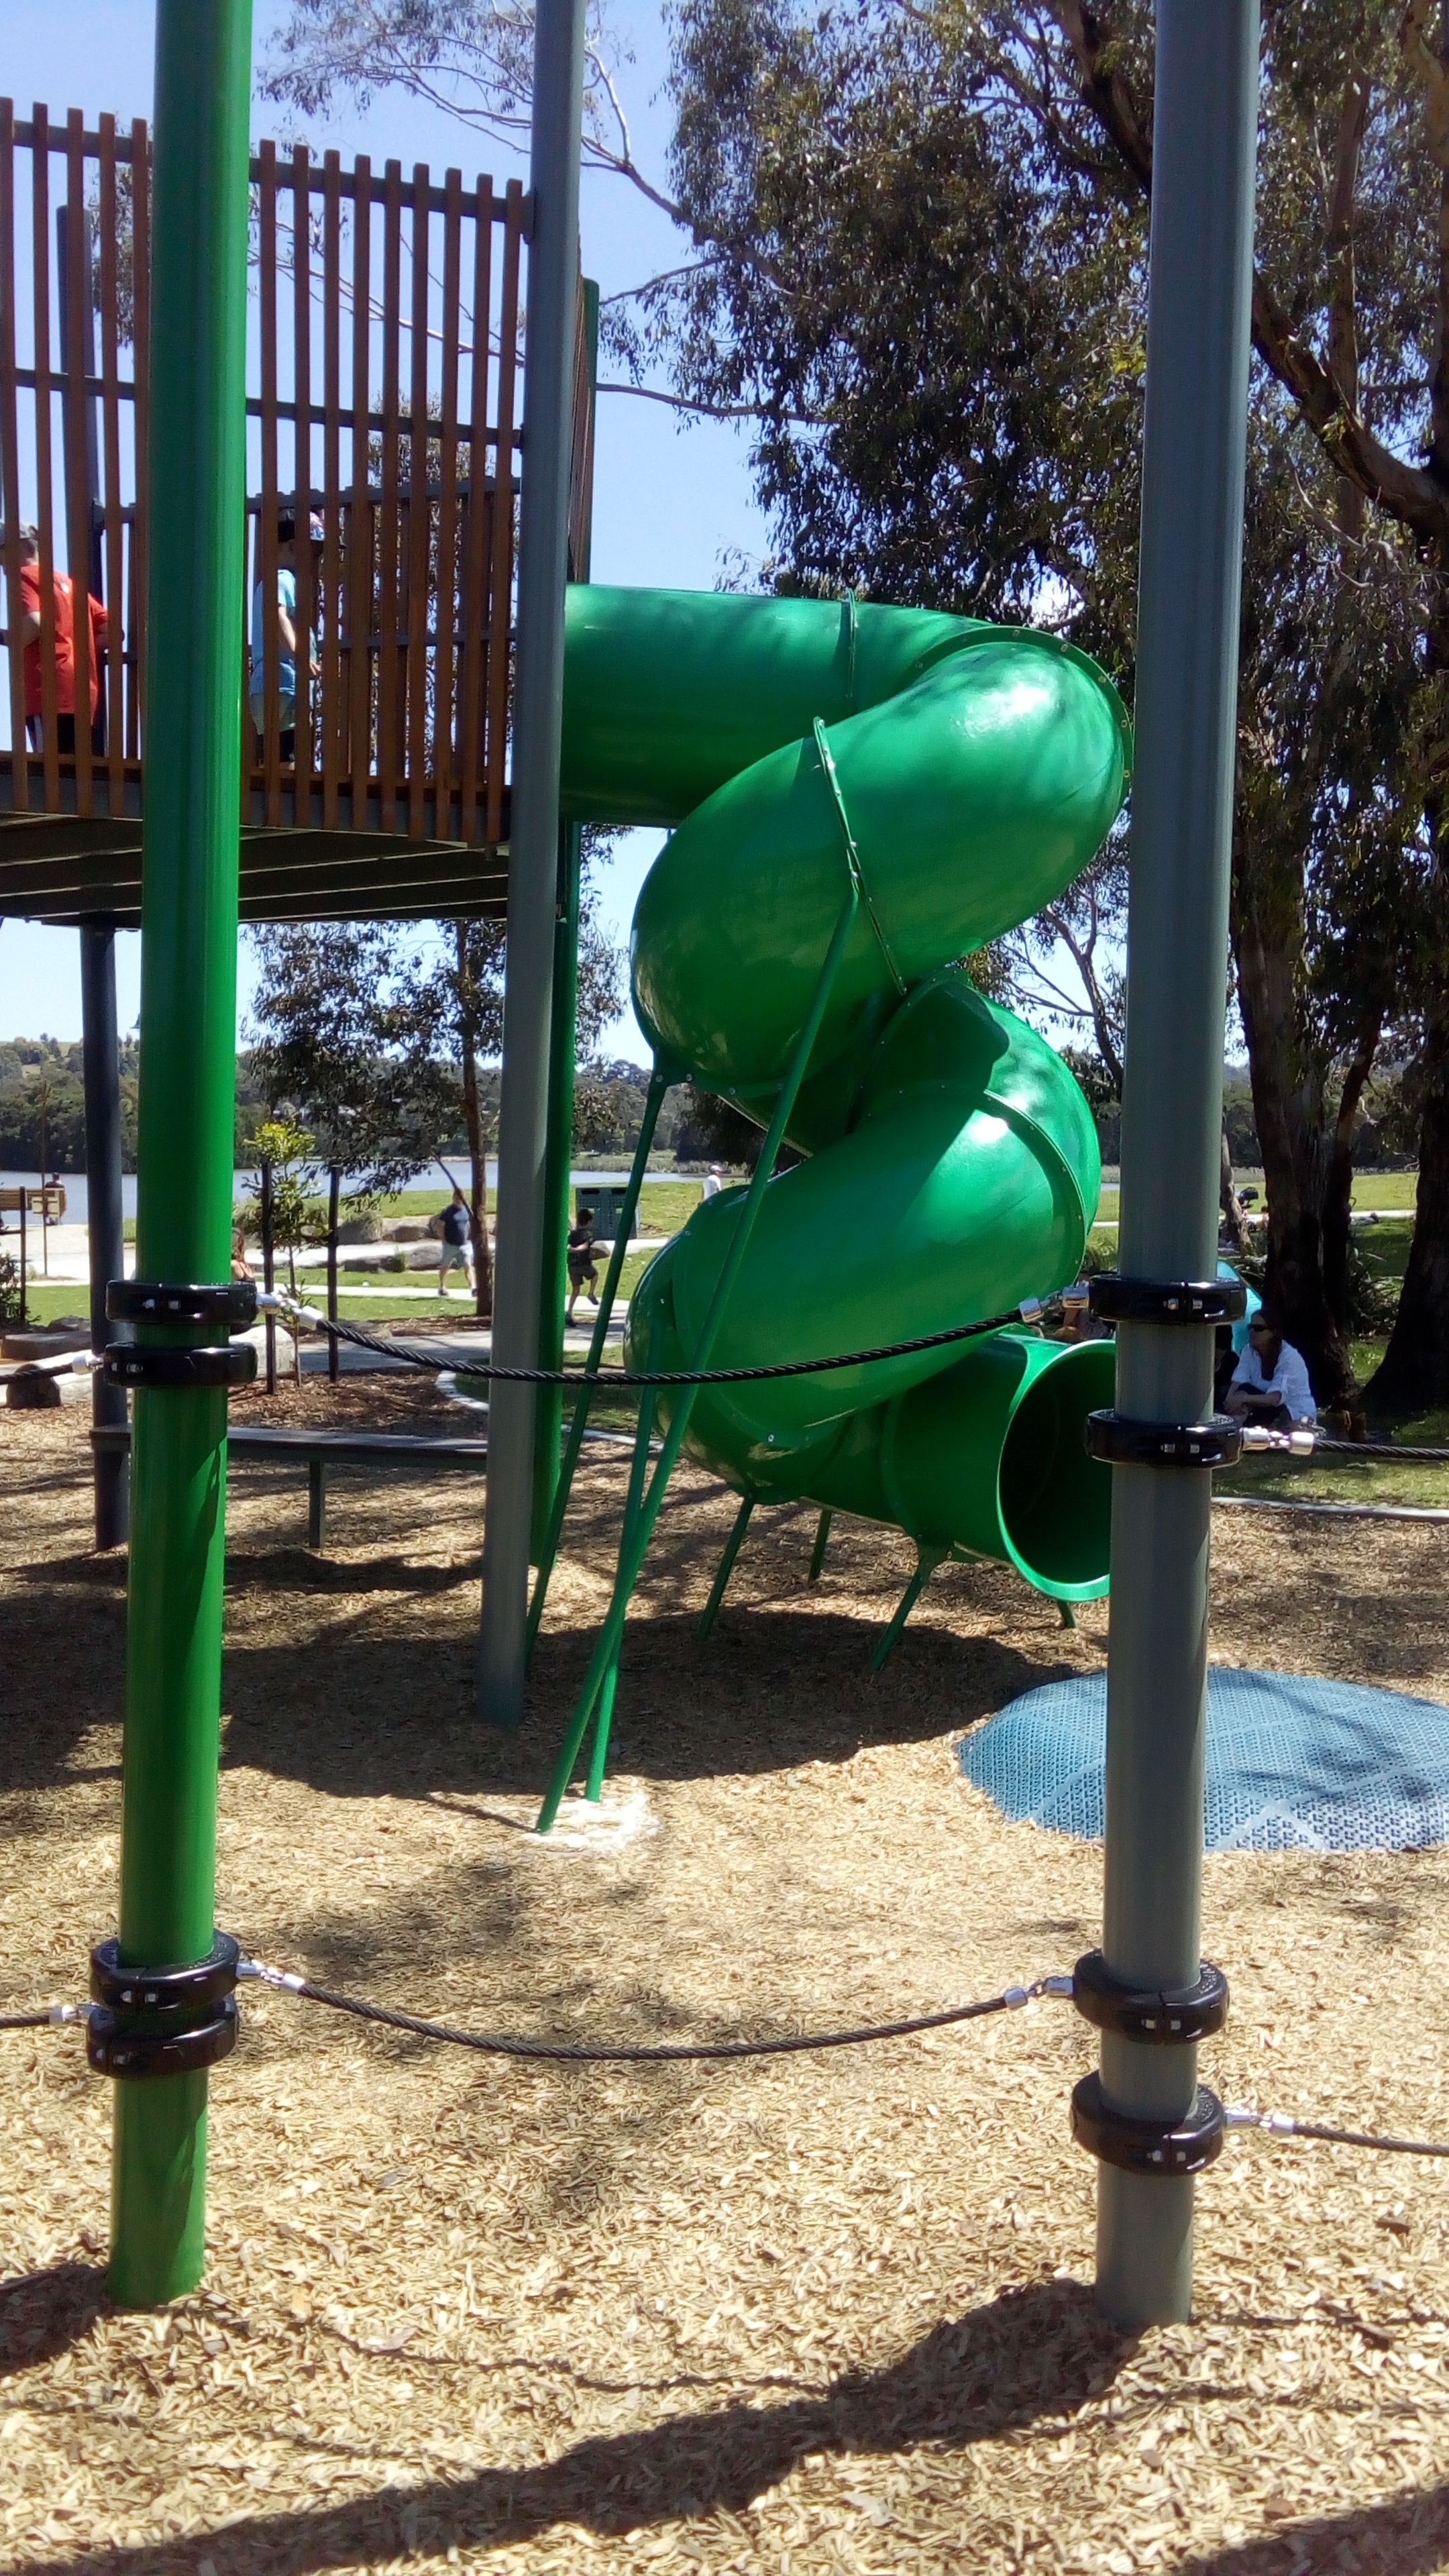 The New Lillydale Lake Playground - Melbourne